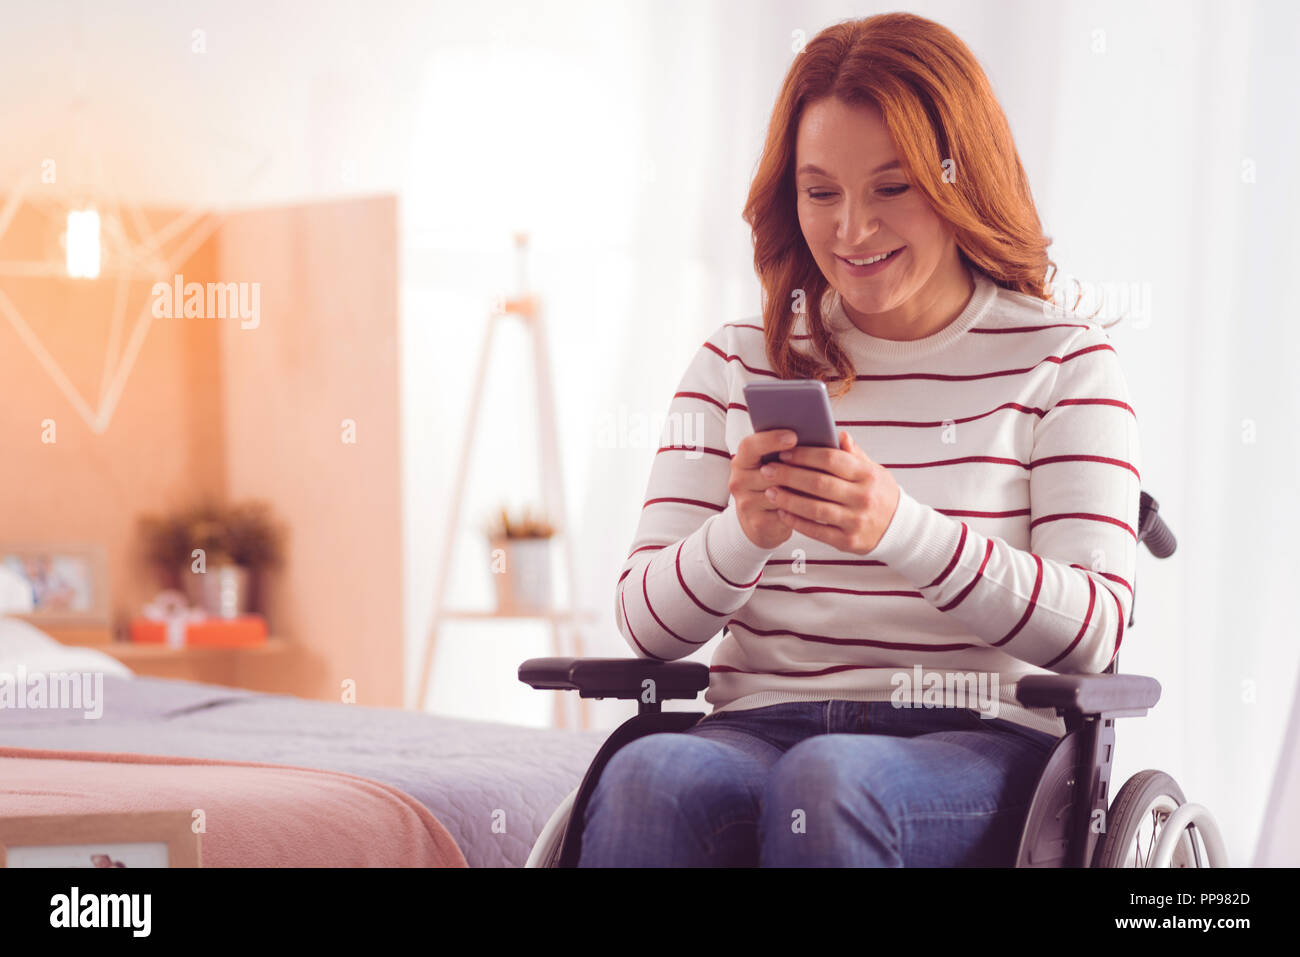 Positive wheelchaired woman using smartphone Stock Photo